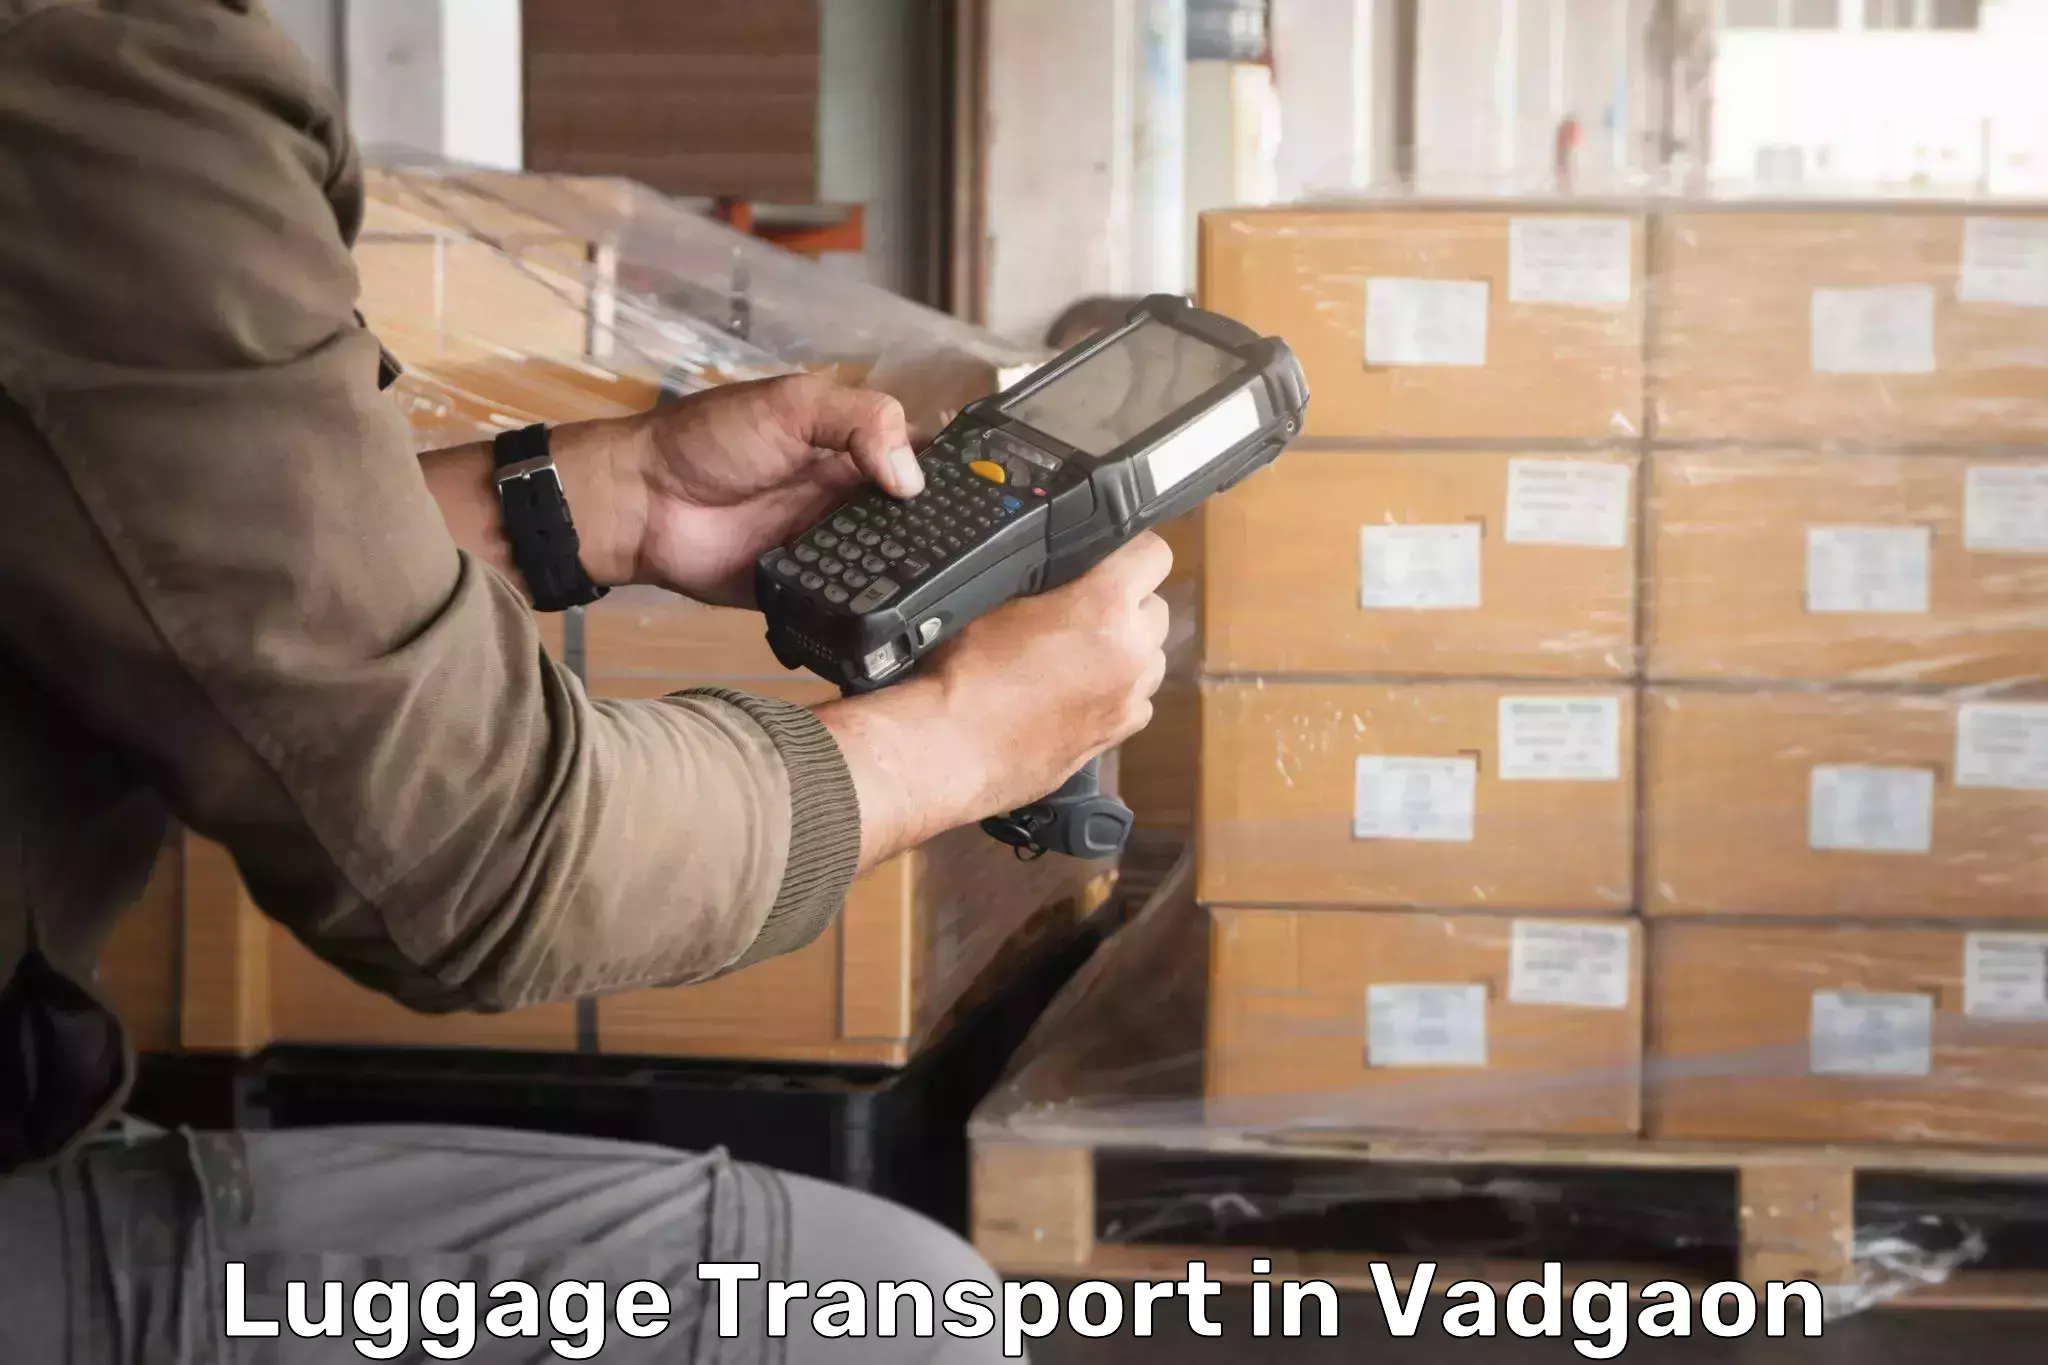 Luggage transport deals in Vadgaon